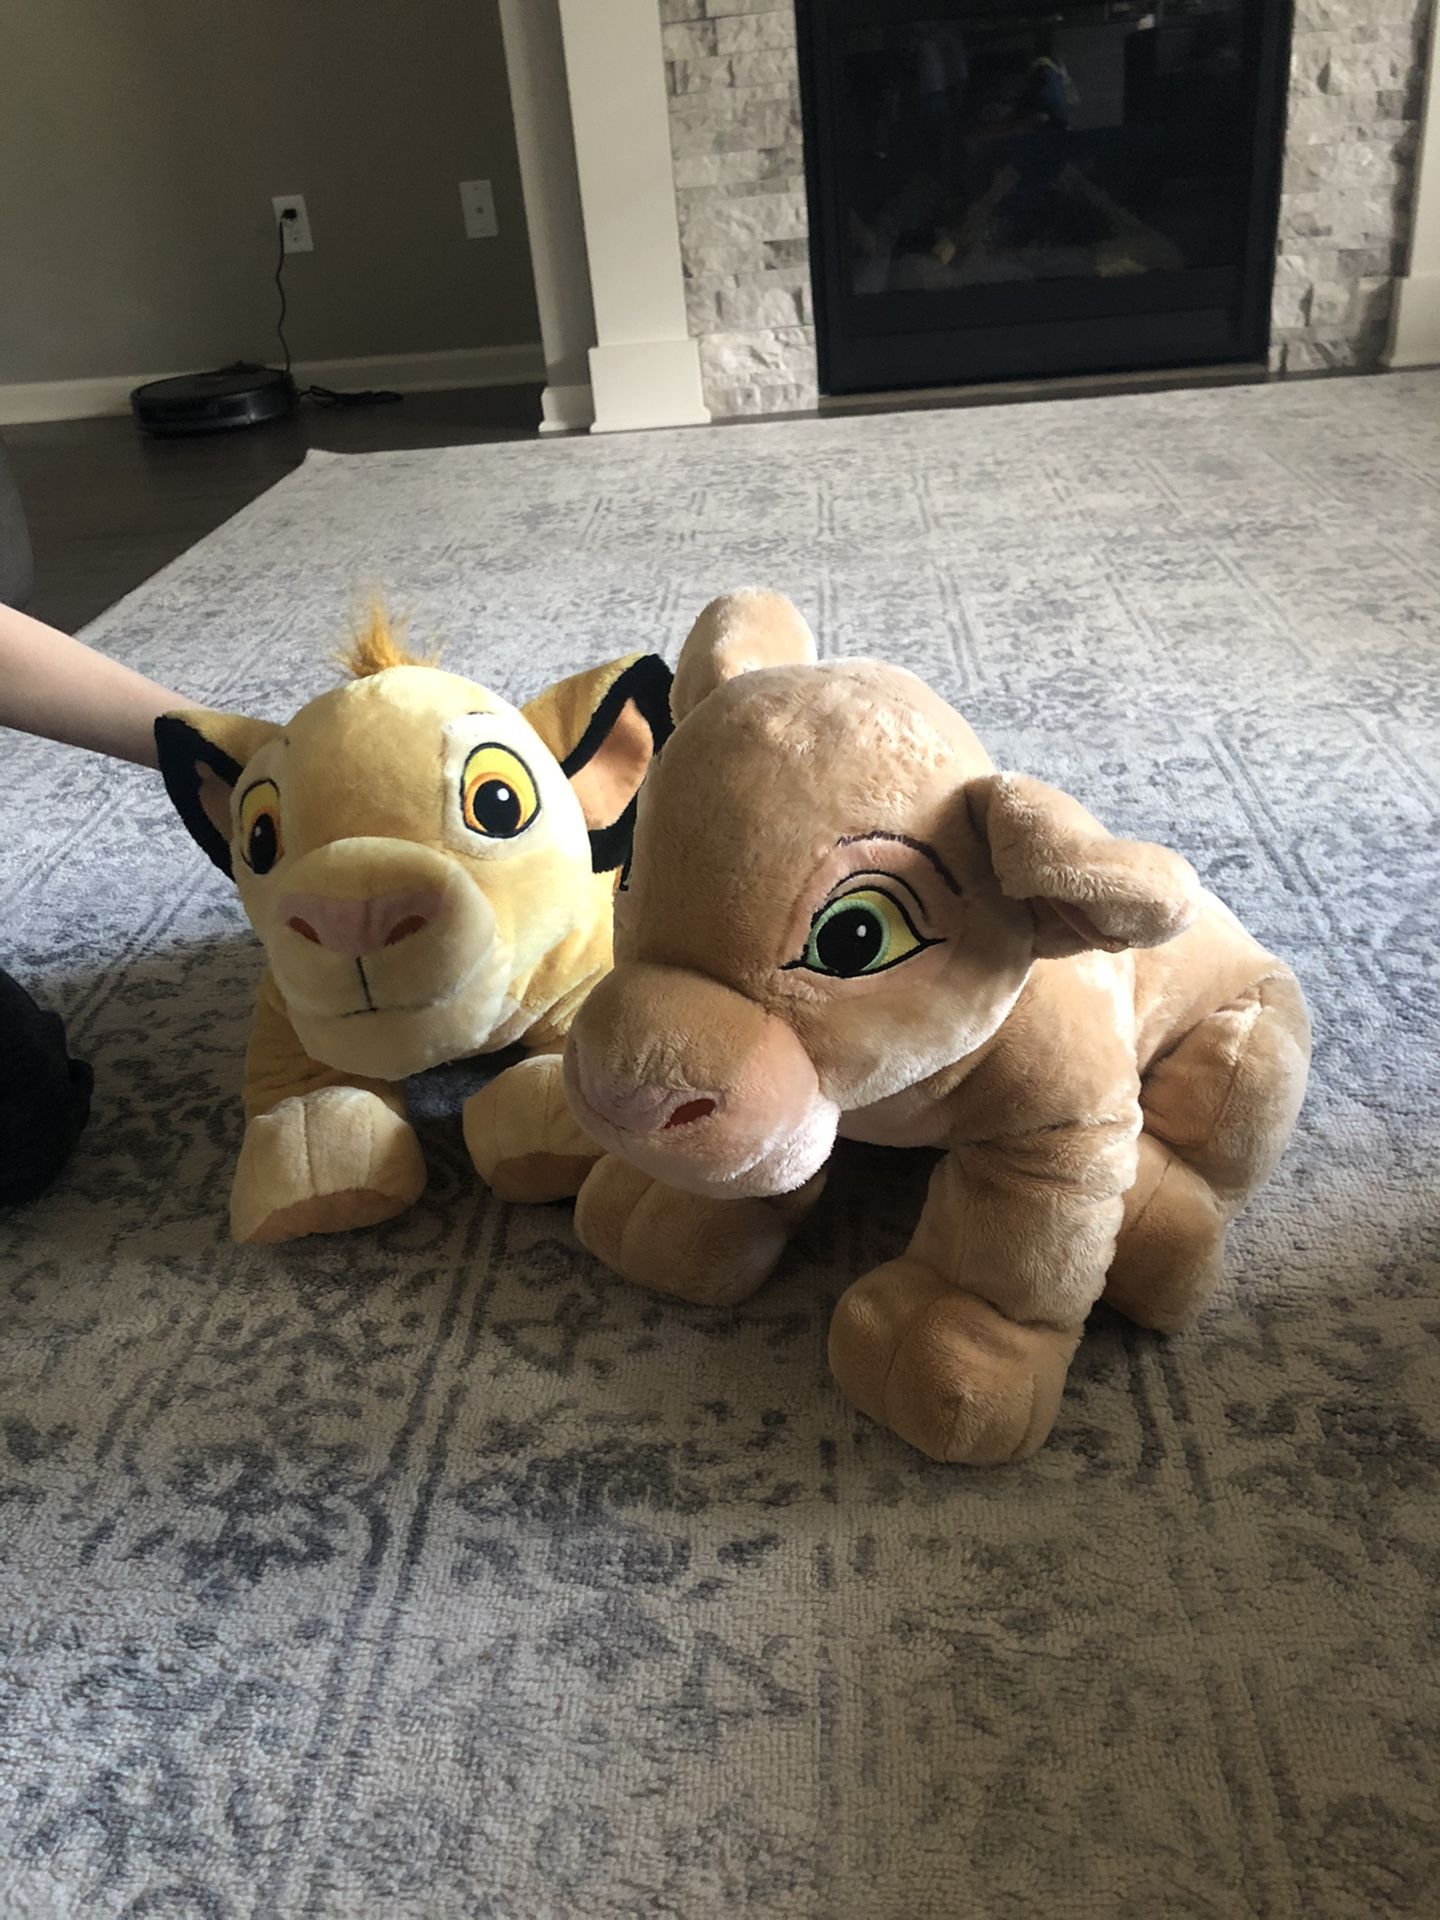 Stuffed animals from lion king